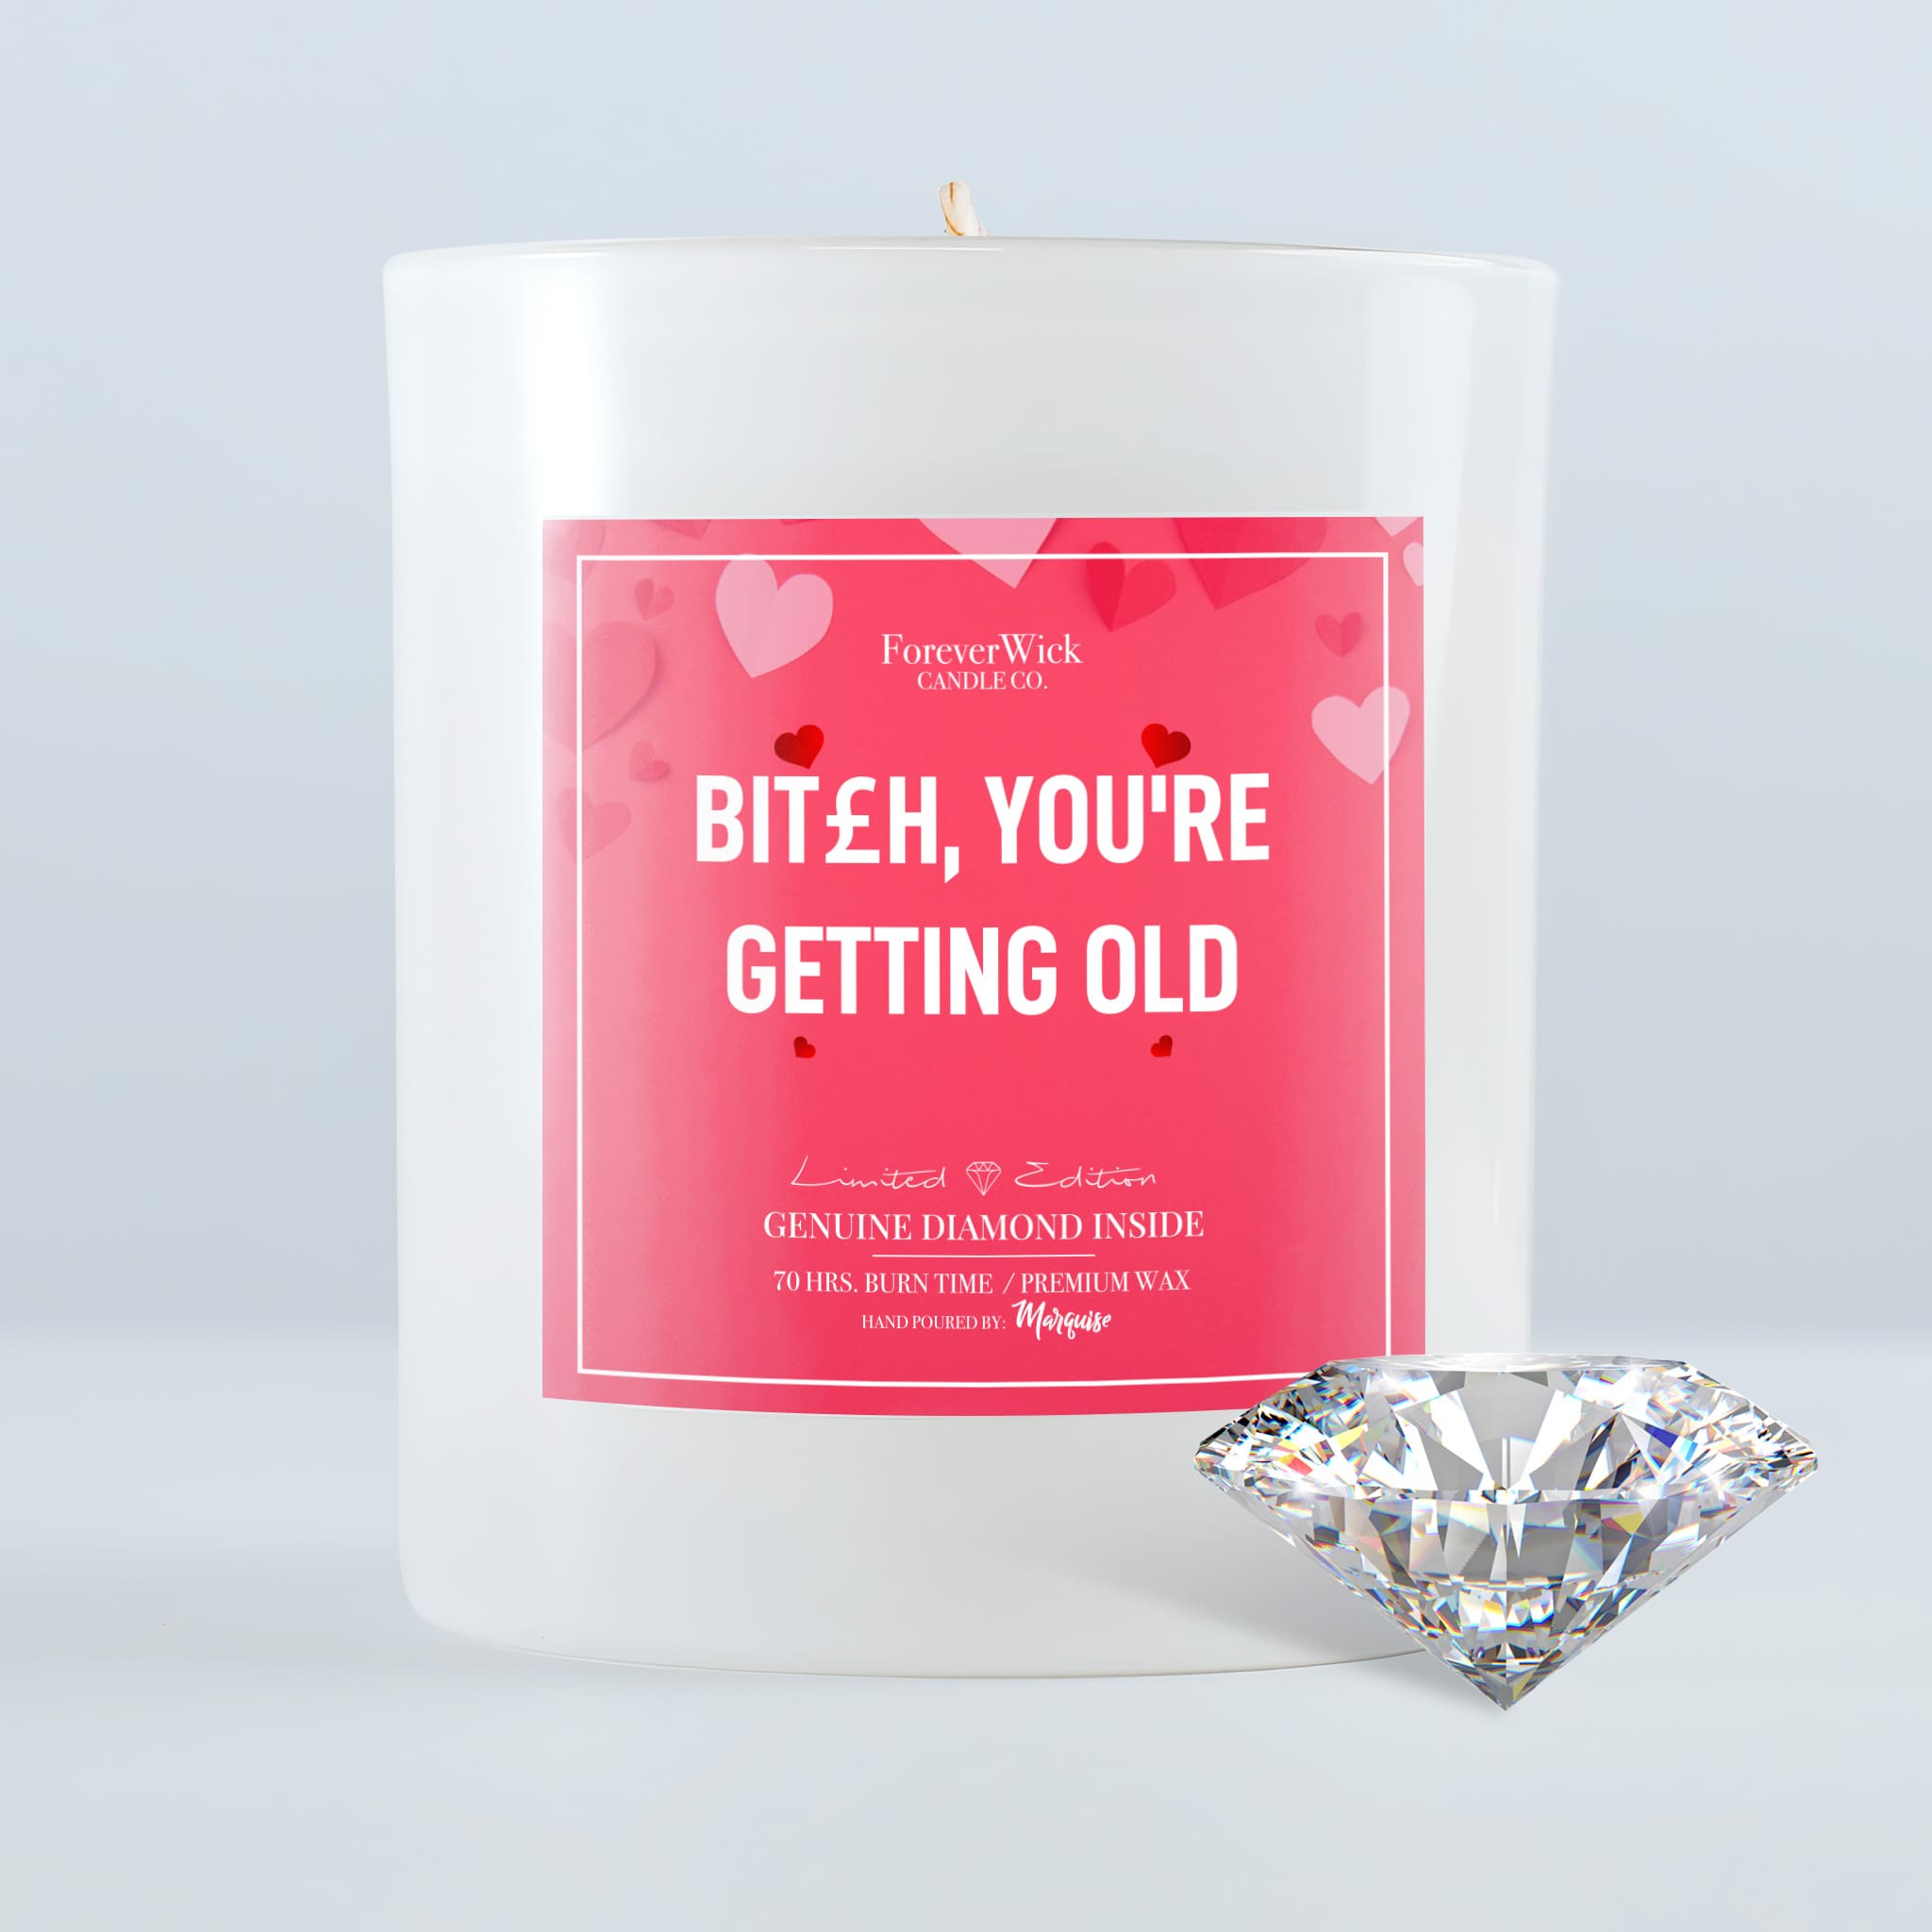 B*tch You're Getting Old Diamond Candle